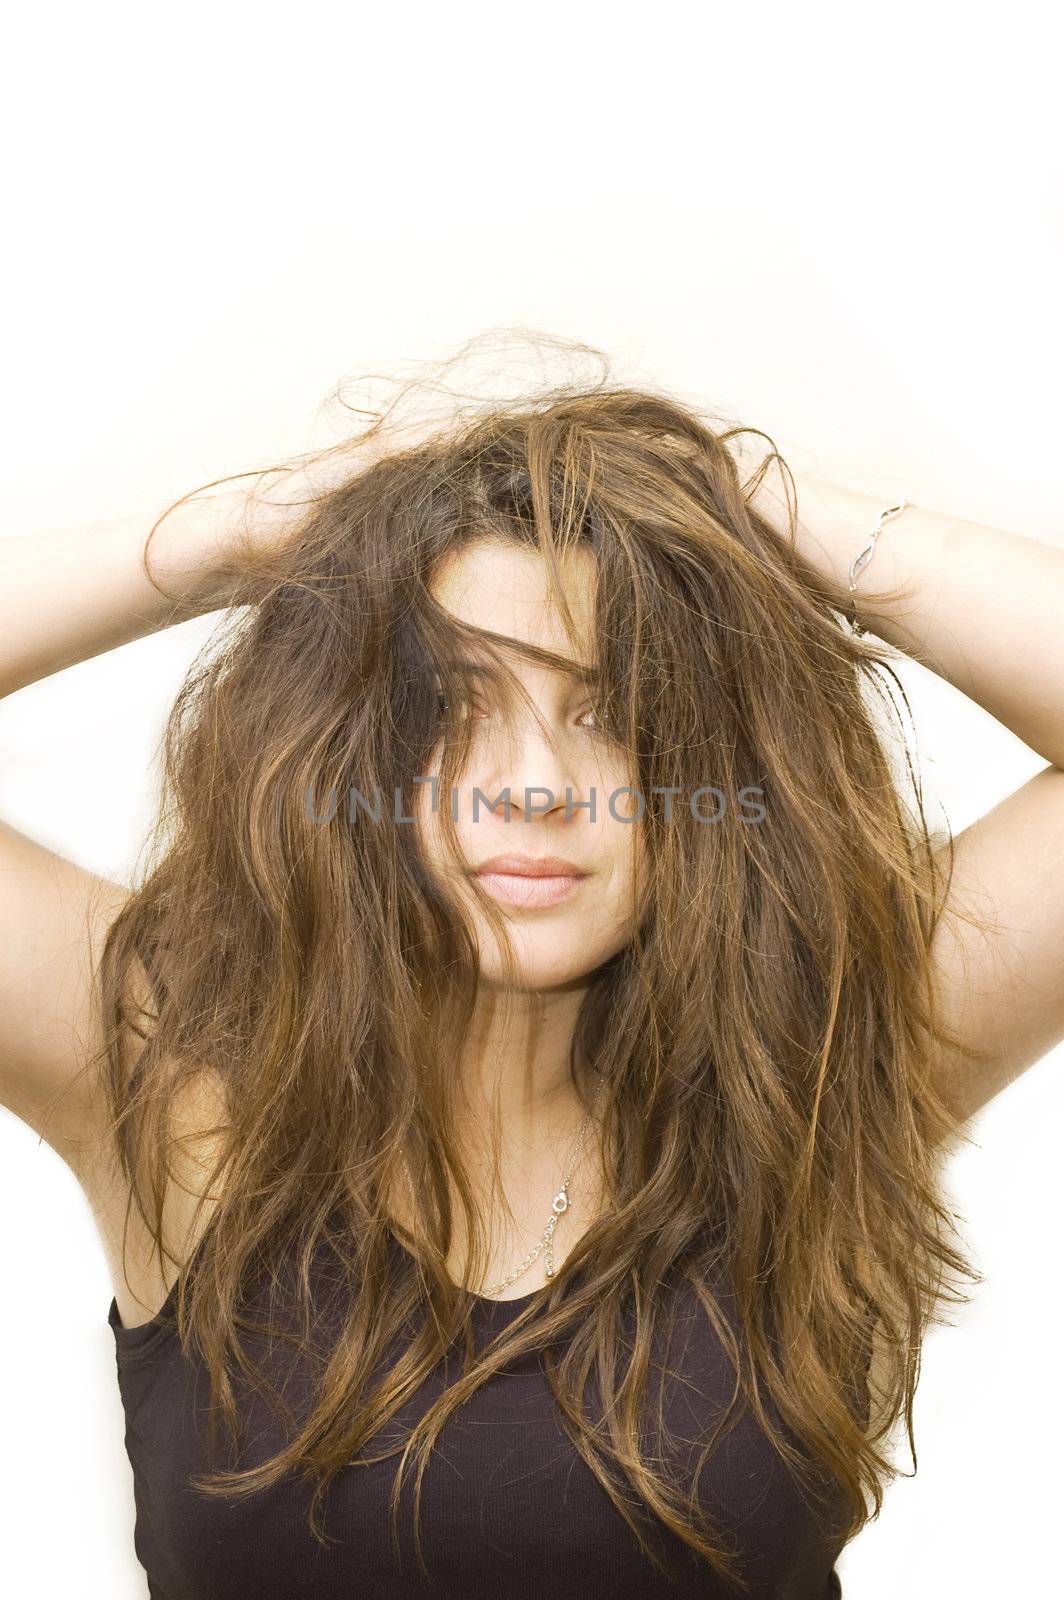 A teenage woman with crazy hairstyle